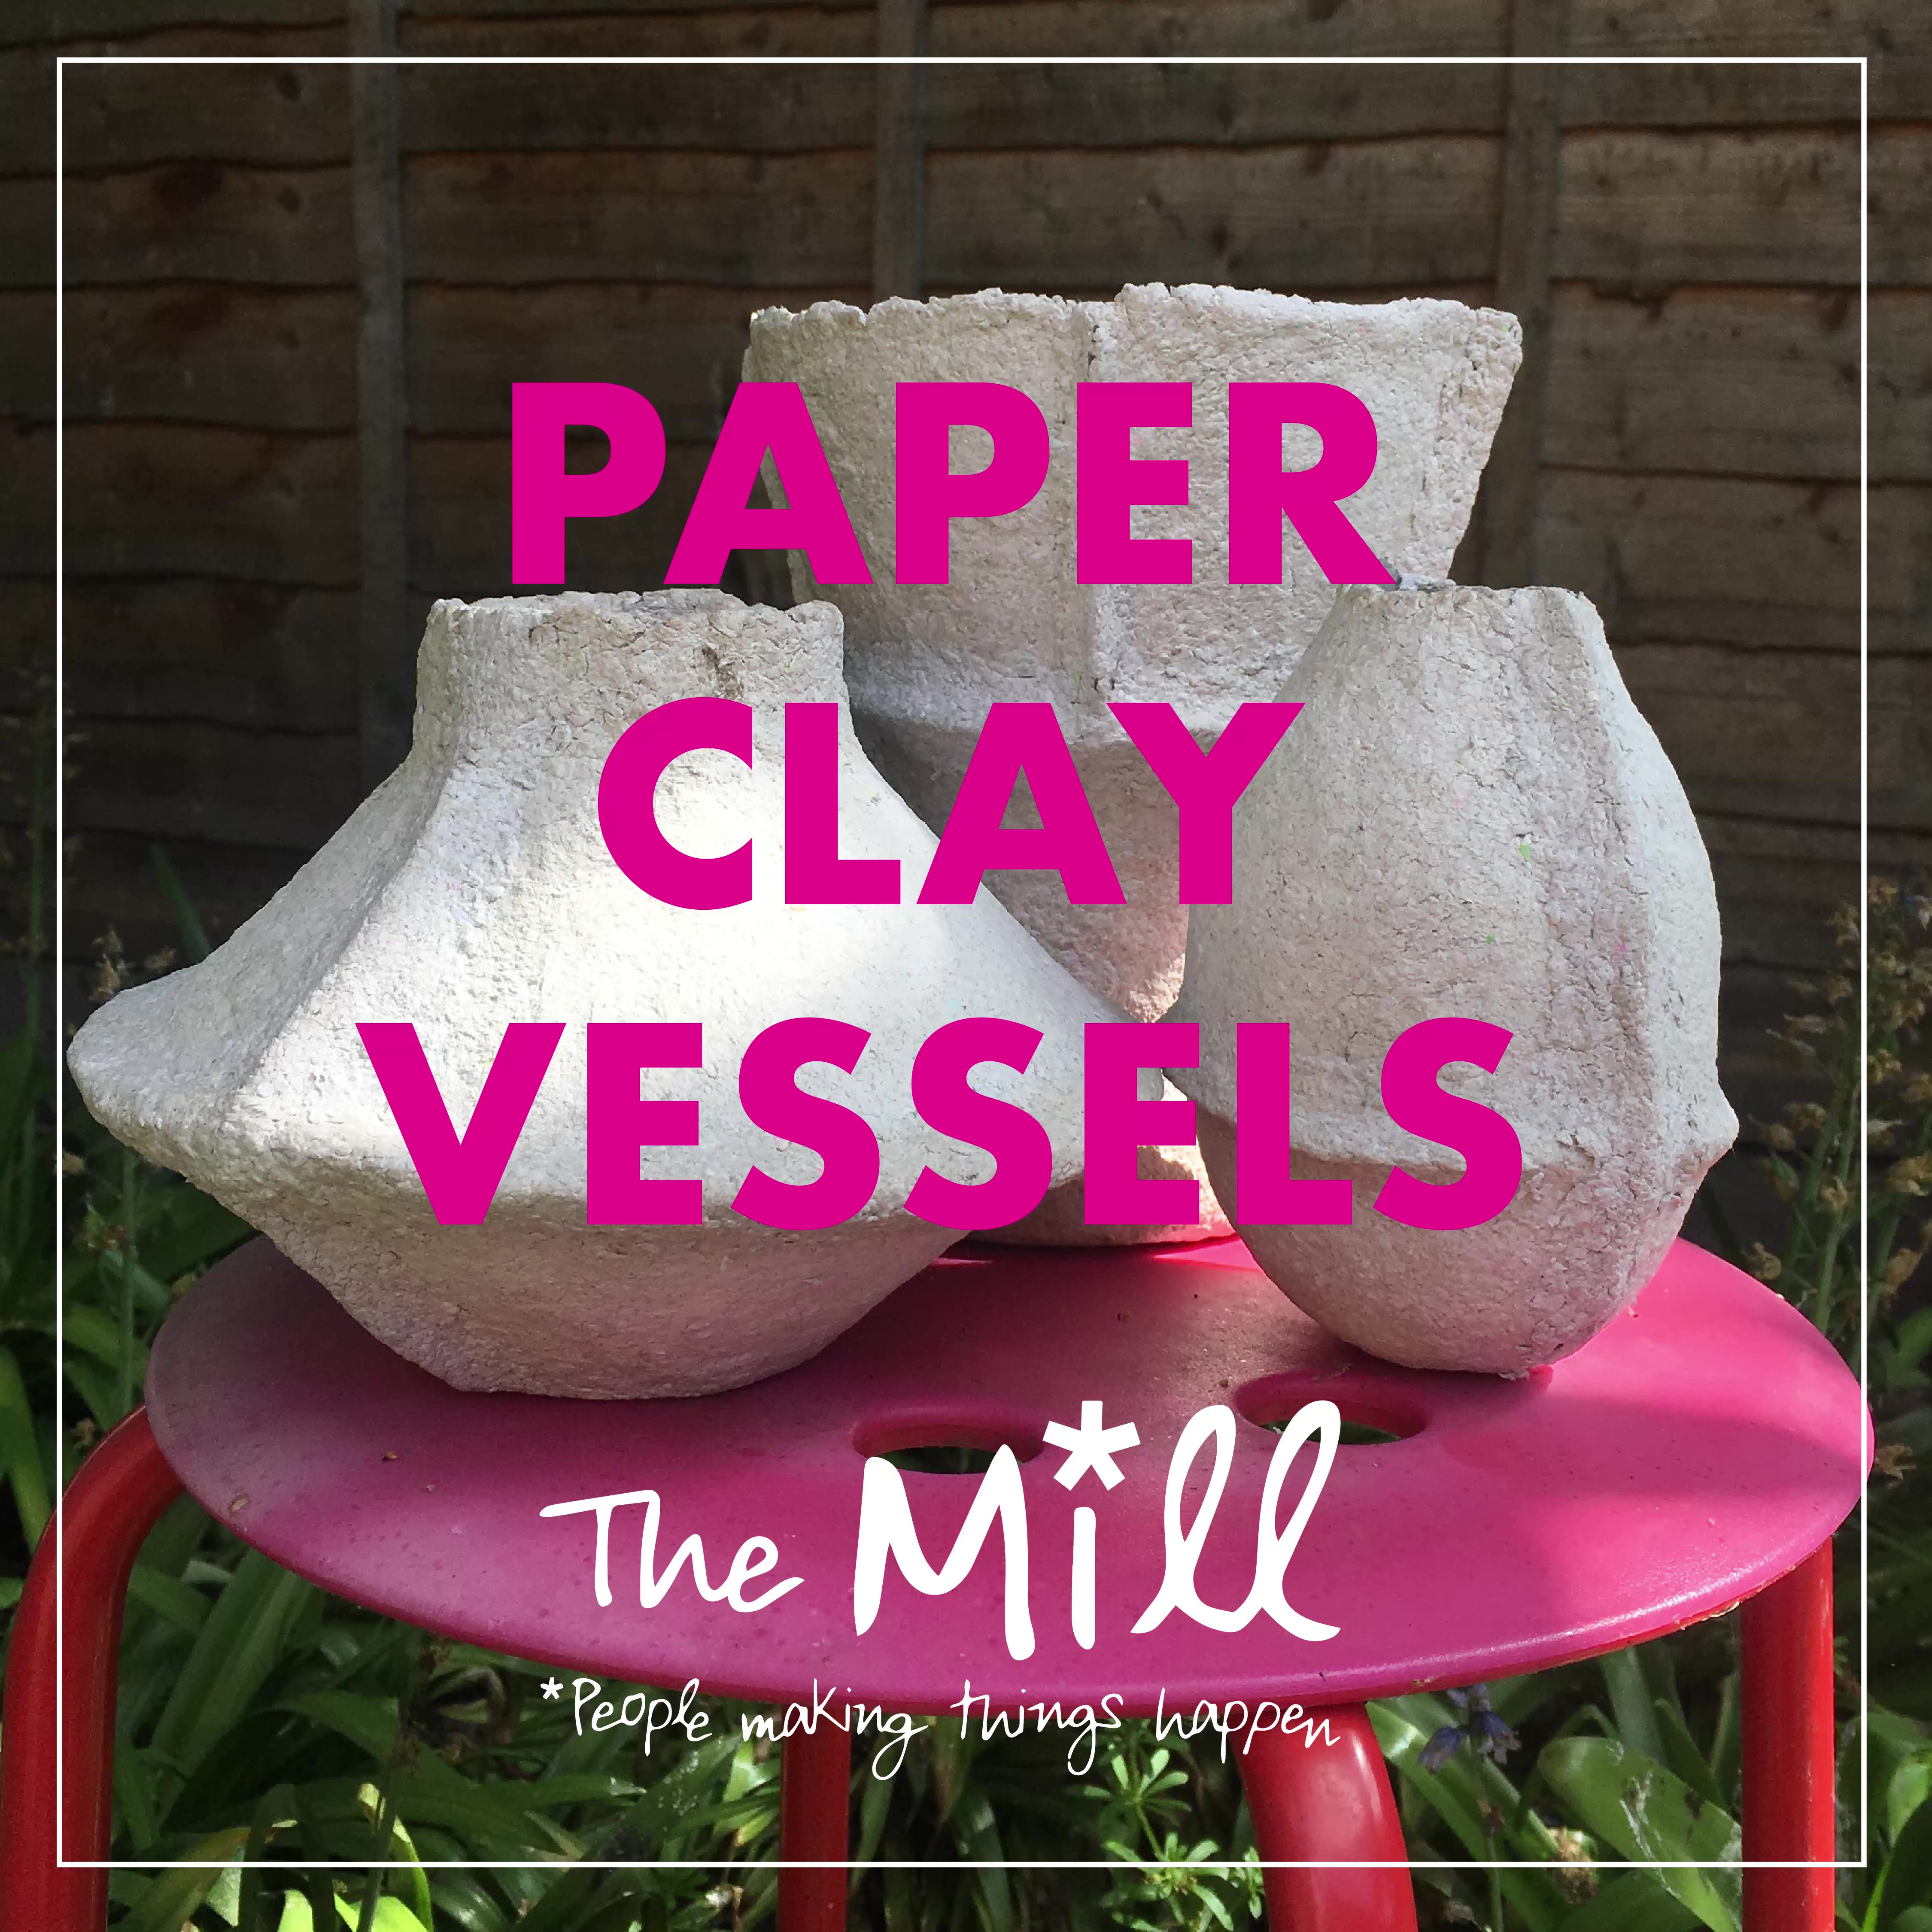 Paper Clay Vessels title page showing three sculptural papermache containers in bulbous shapes, arranged on a table